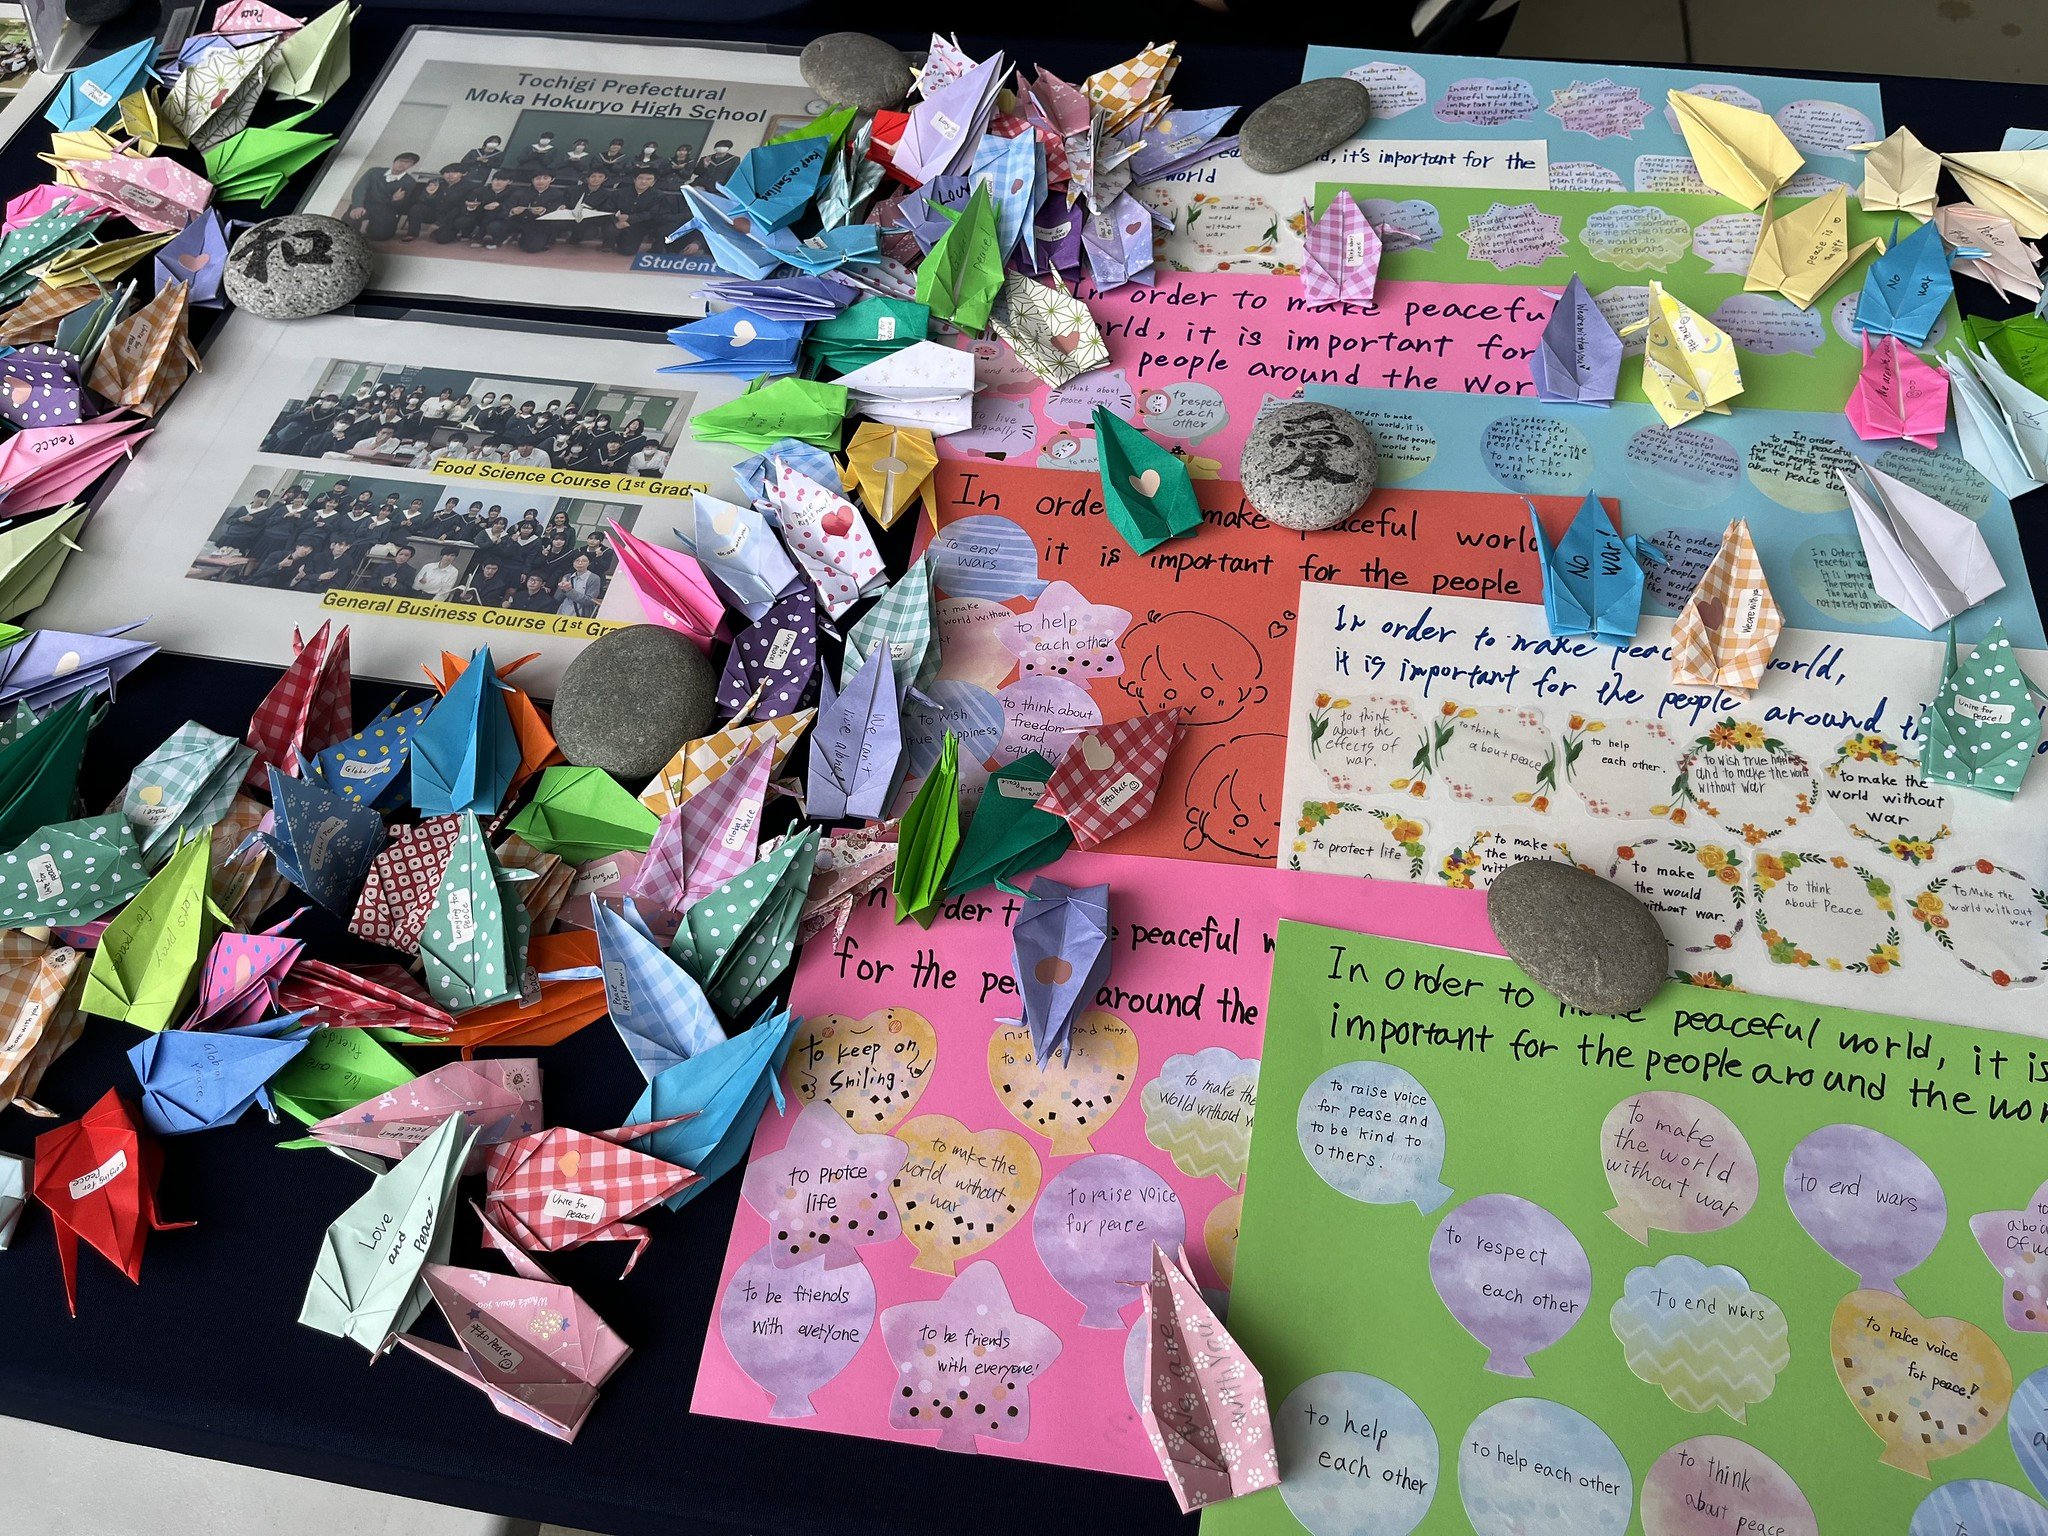  Cranes and messages of peace donated by Moka Hokuryo High School 